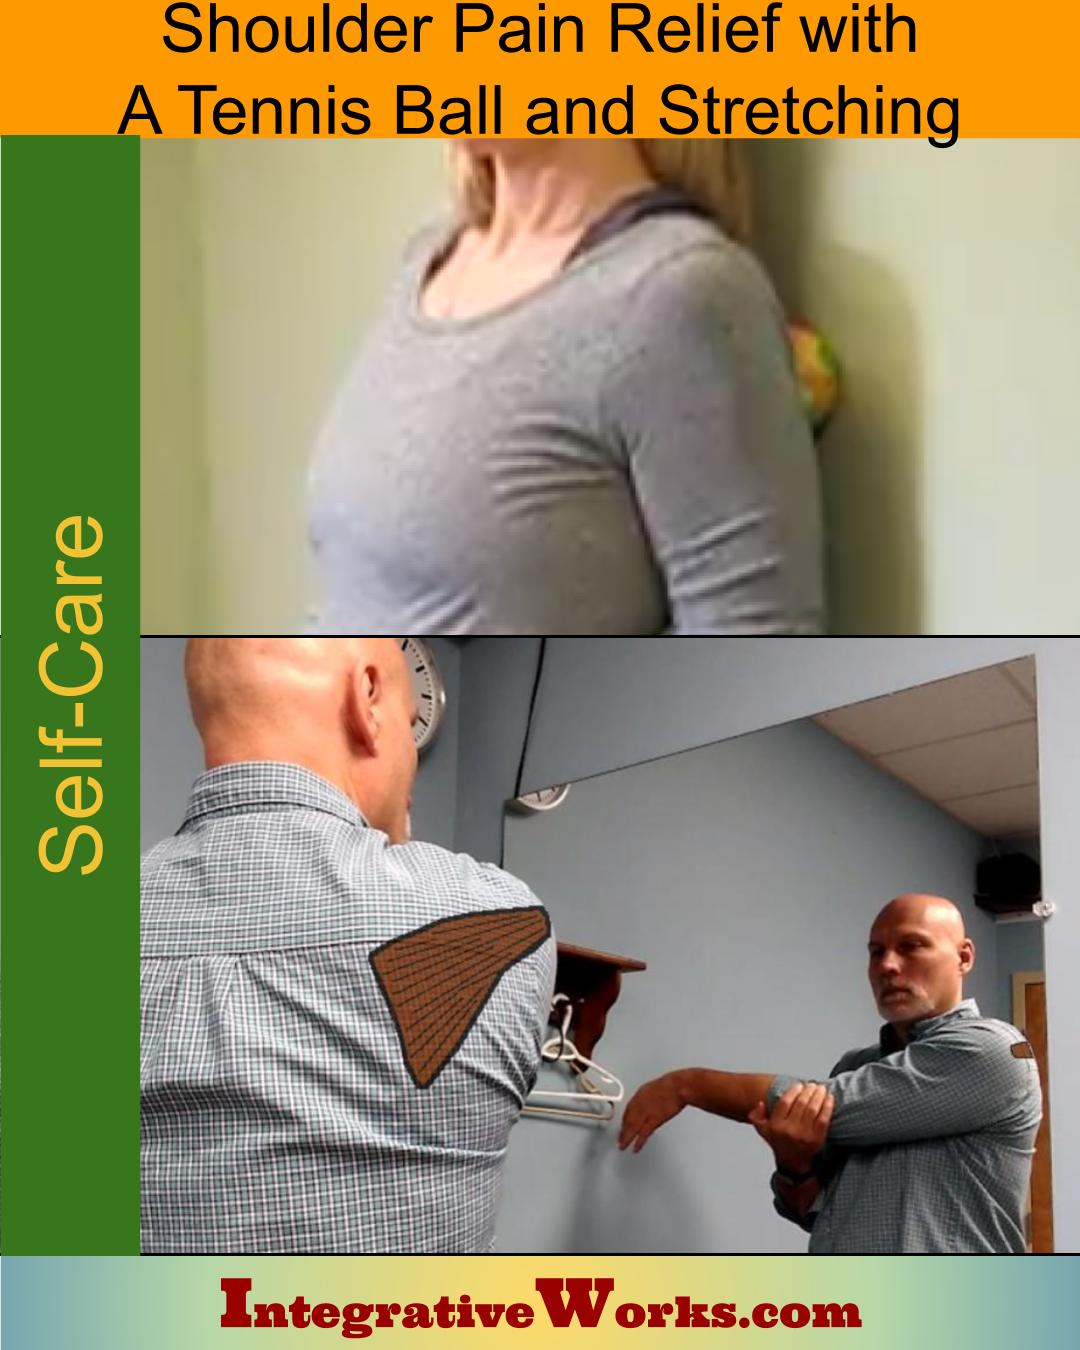 Shoulder Pain Relief with a Tennis Ball and Stretching